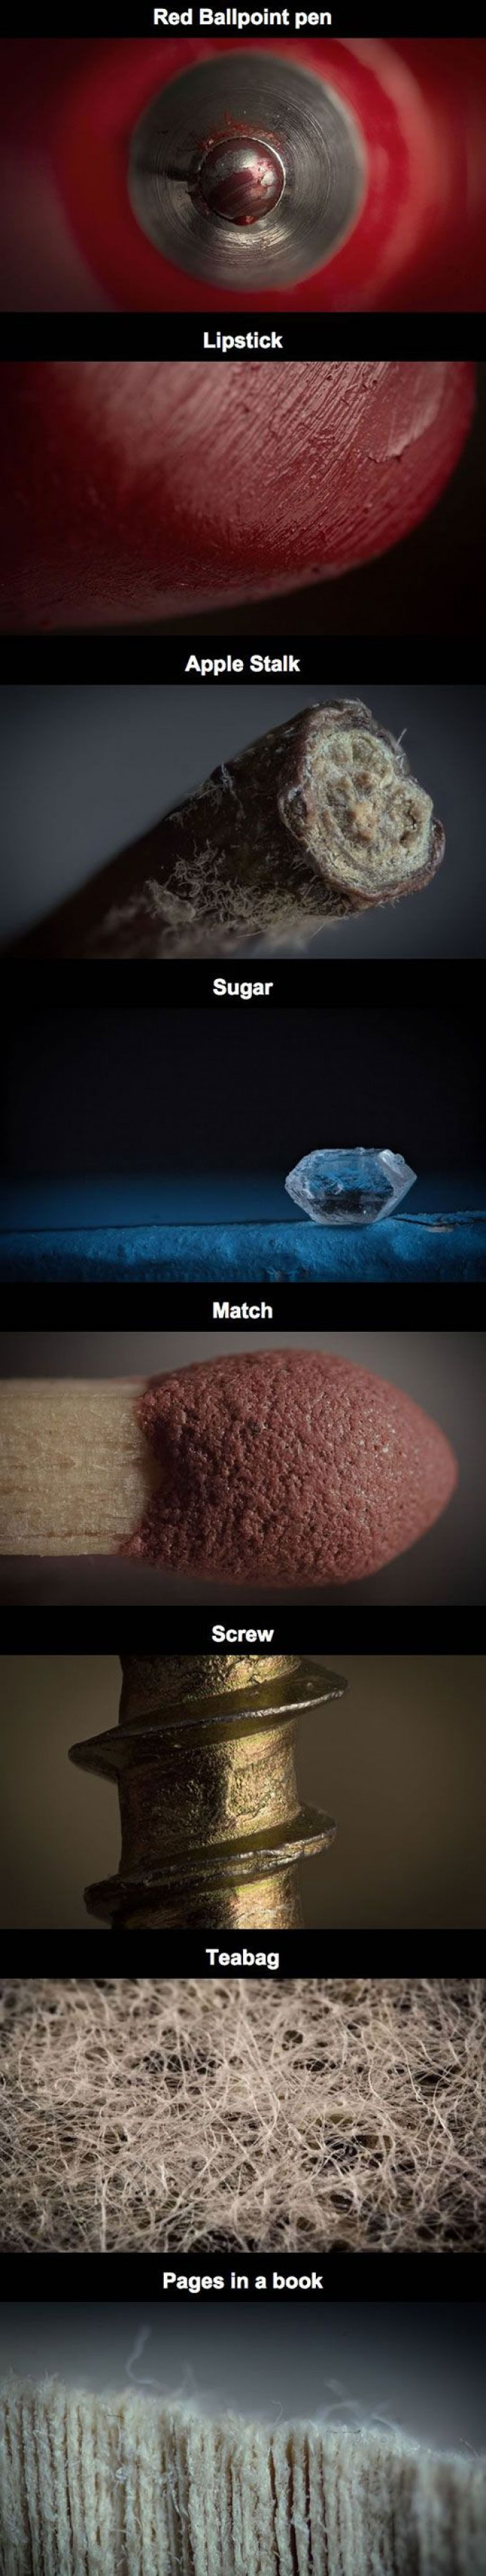 Extreme Close Ups Of Every Day Objects